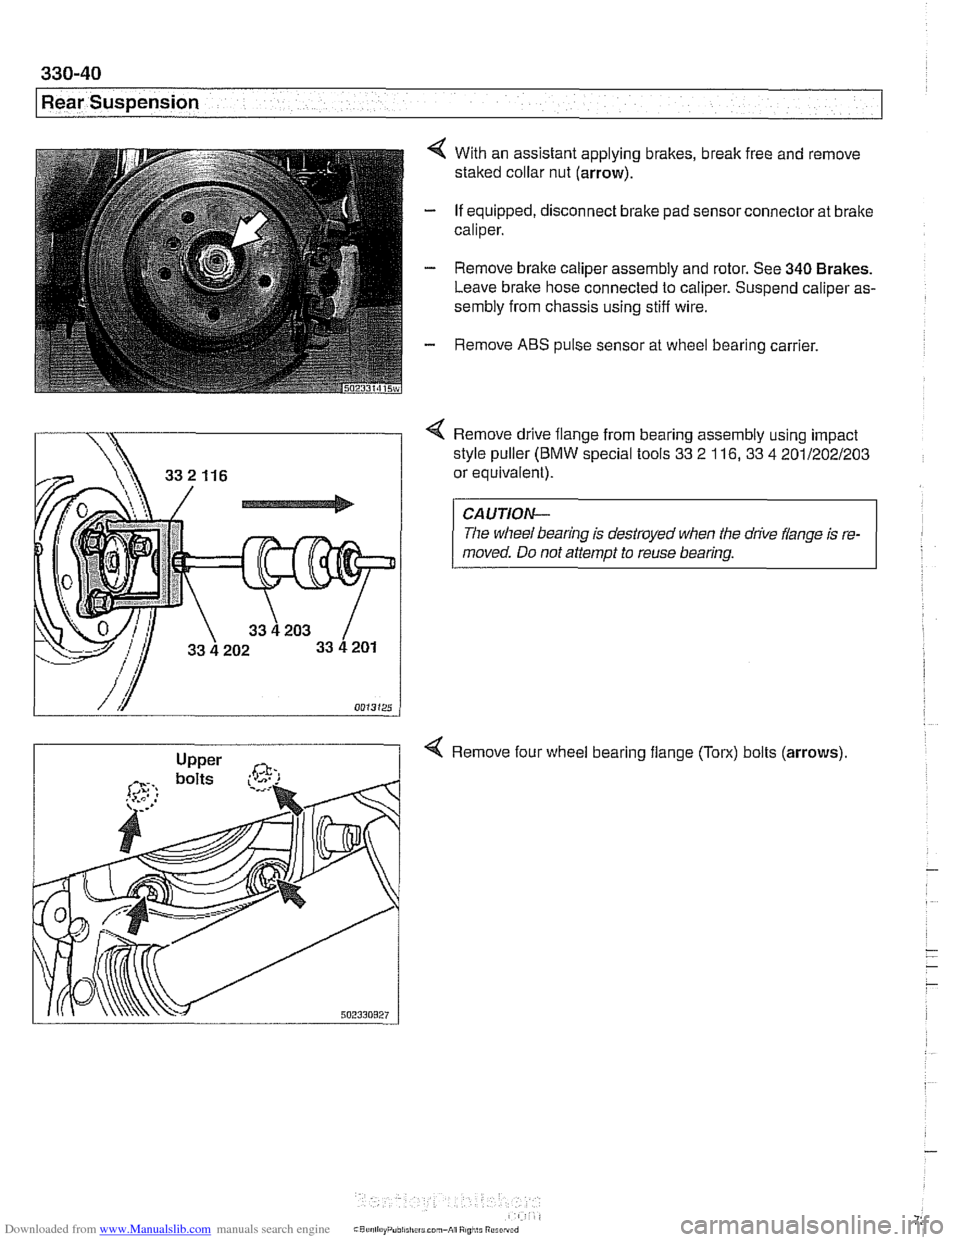 BMW 528i 2000 E39 Workshop Manual Downloaded from www.Manualslib.com manuals search engine 
330-40 
Rear Suspension 
4 With an assistant applying brakes, break free and  remove 
staked  collar nut  (arrow). 
- If equipped,  disconnect